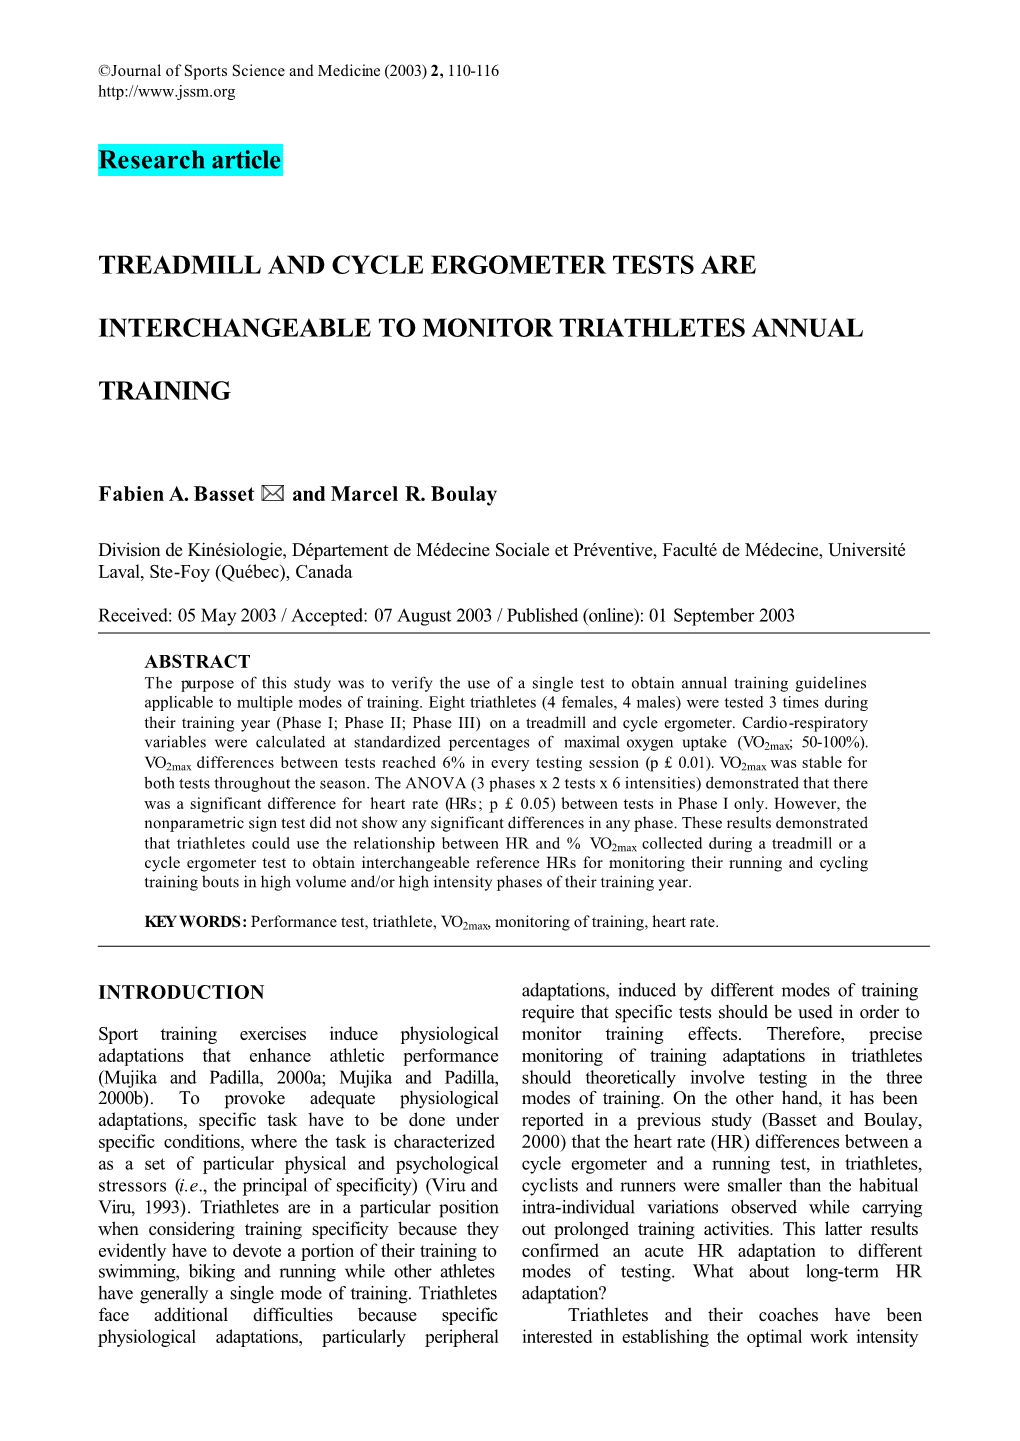 Research Article TREADMILL and CYCLE ERGOMETER TESTS ARE